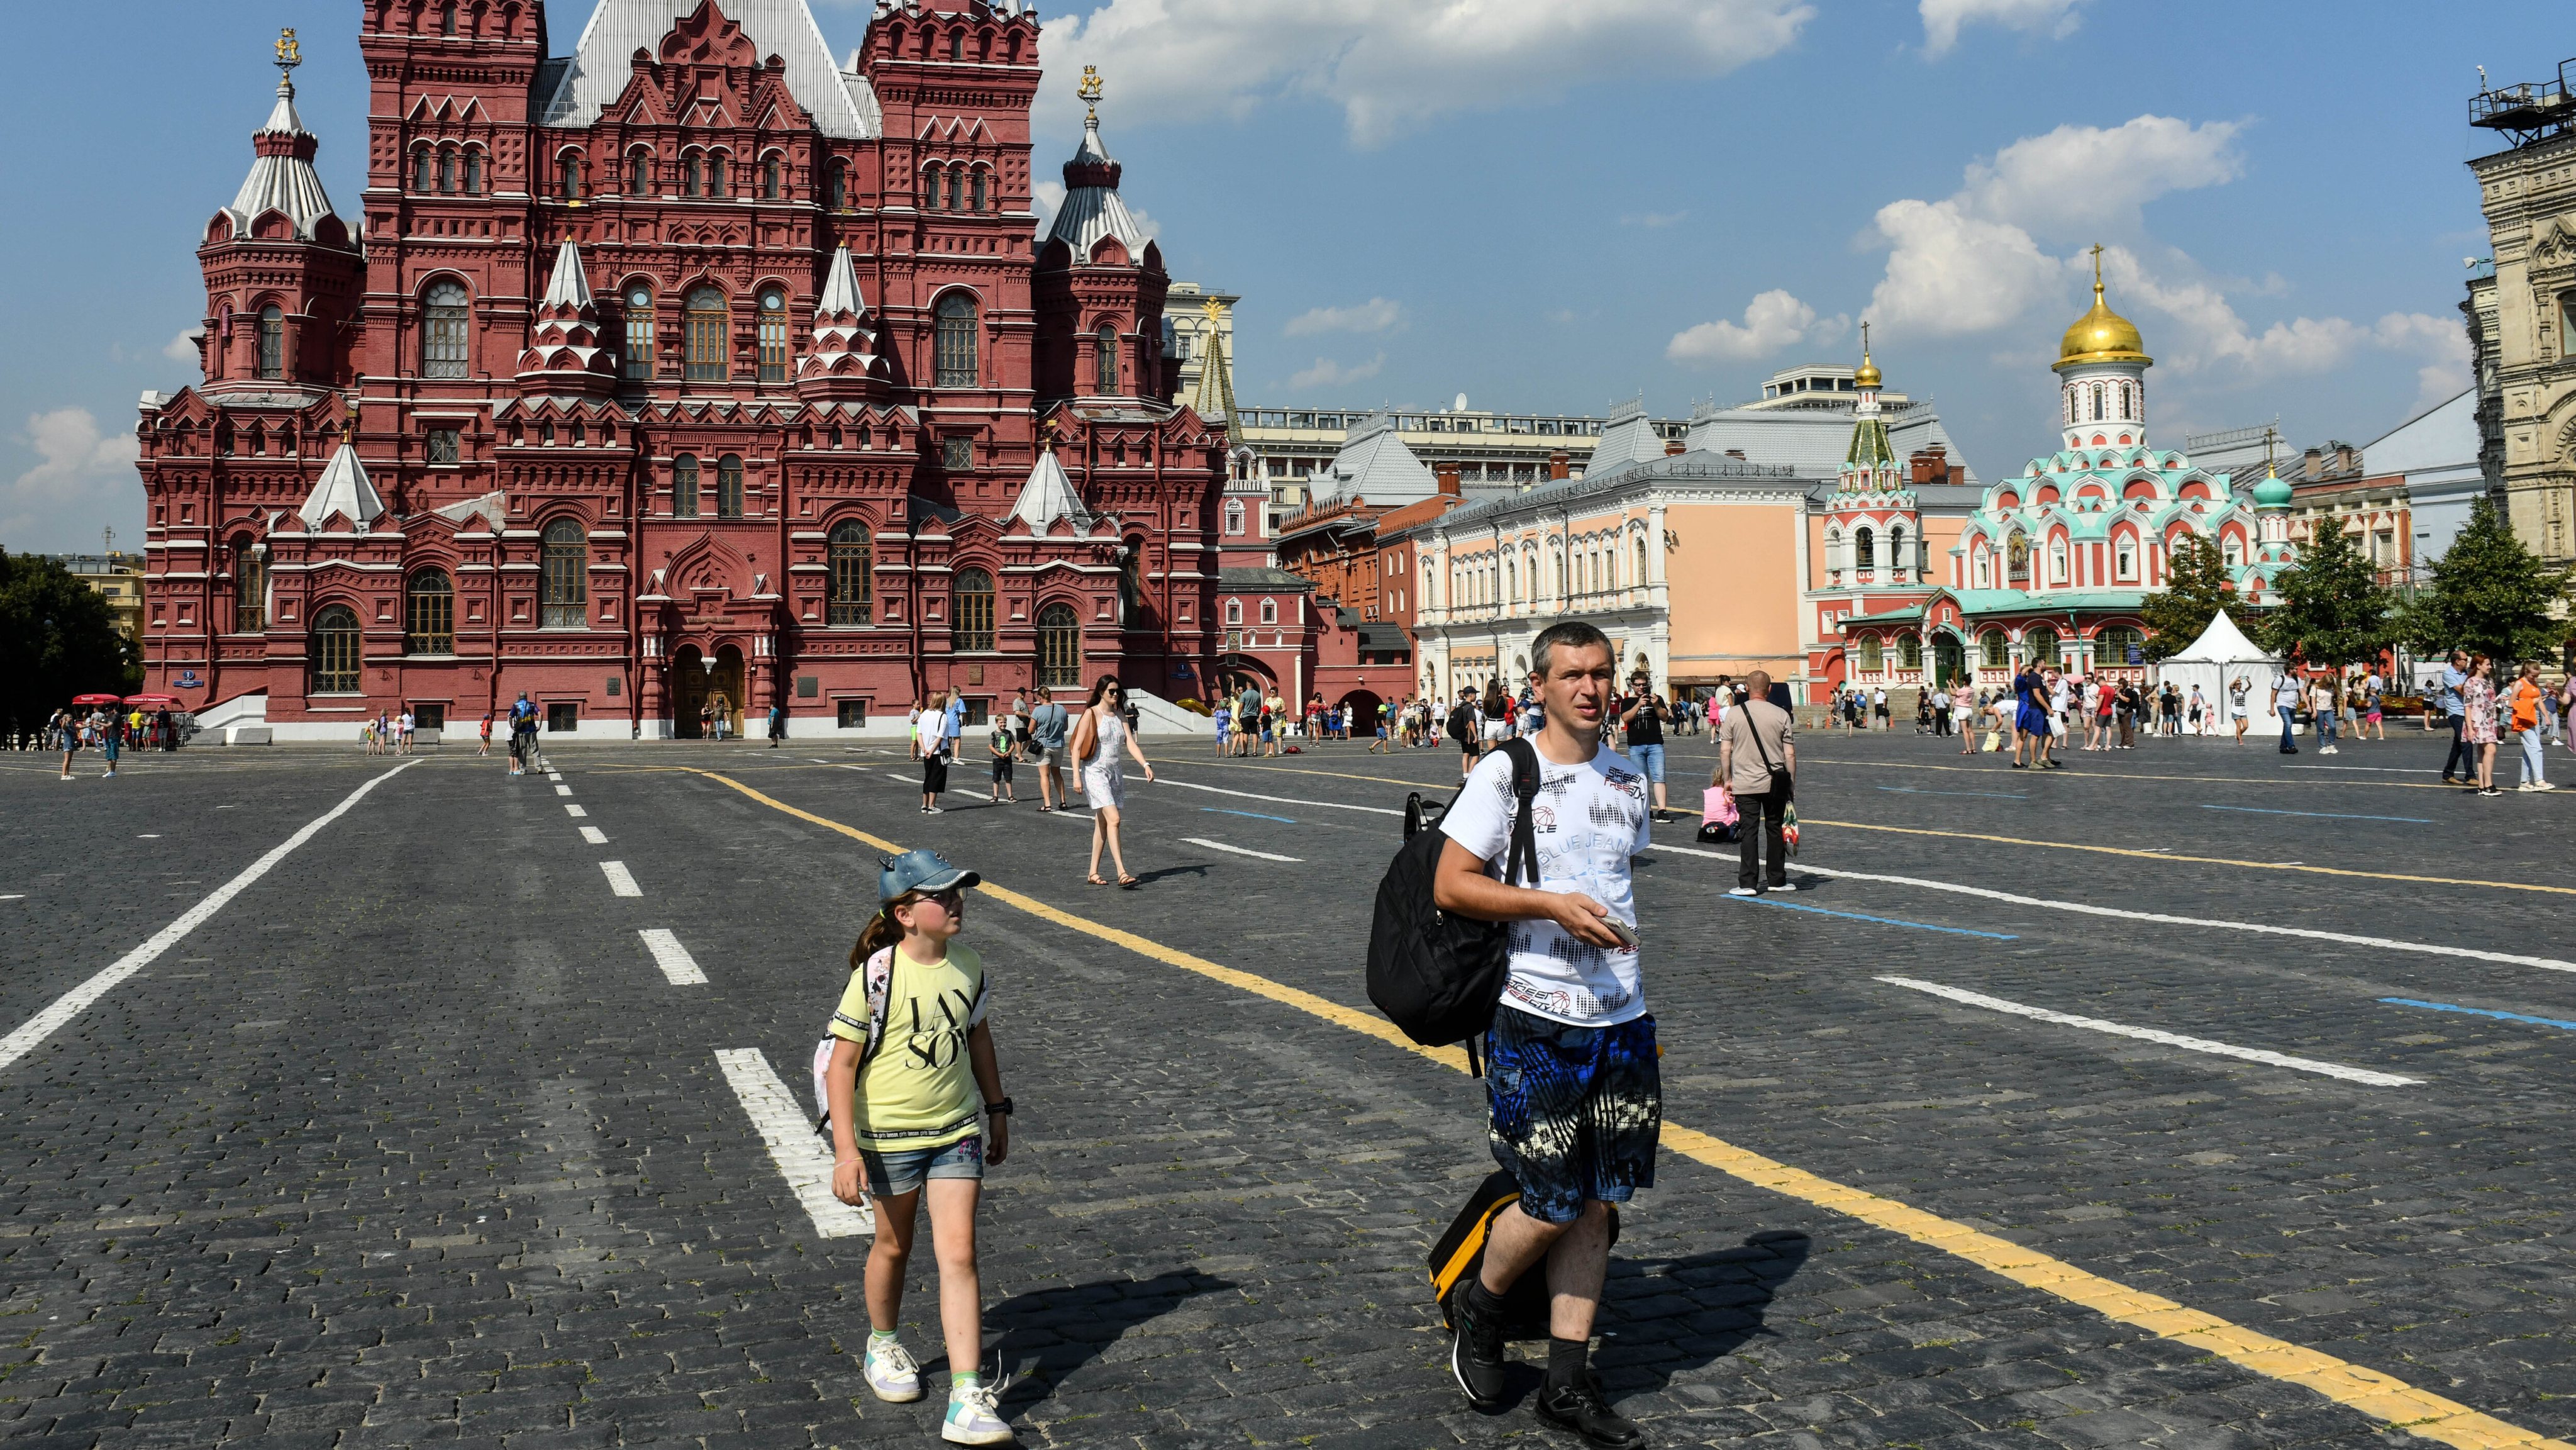 Father and daughter walk around the Red Square